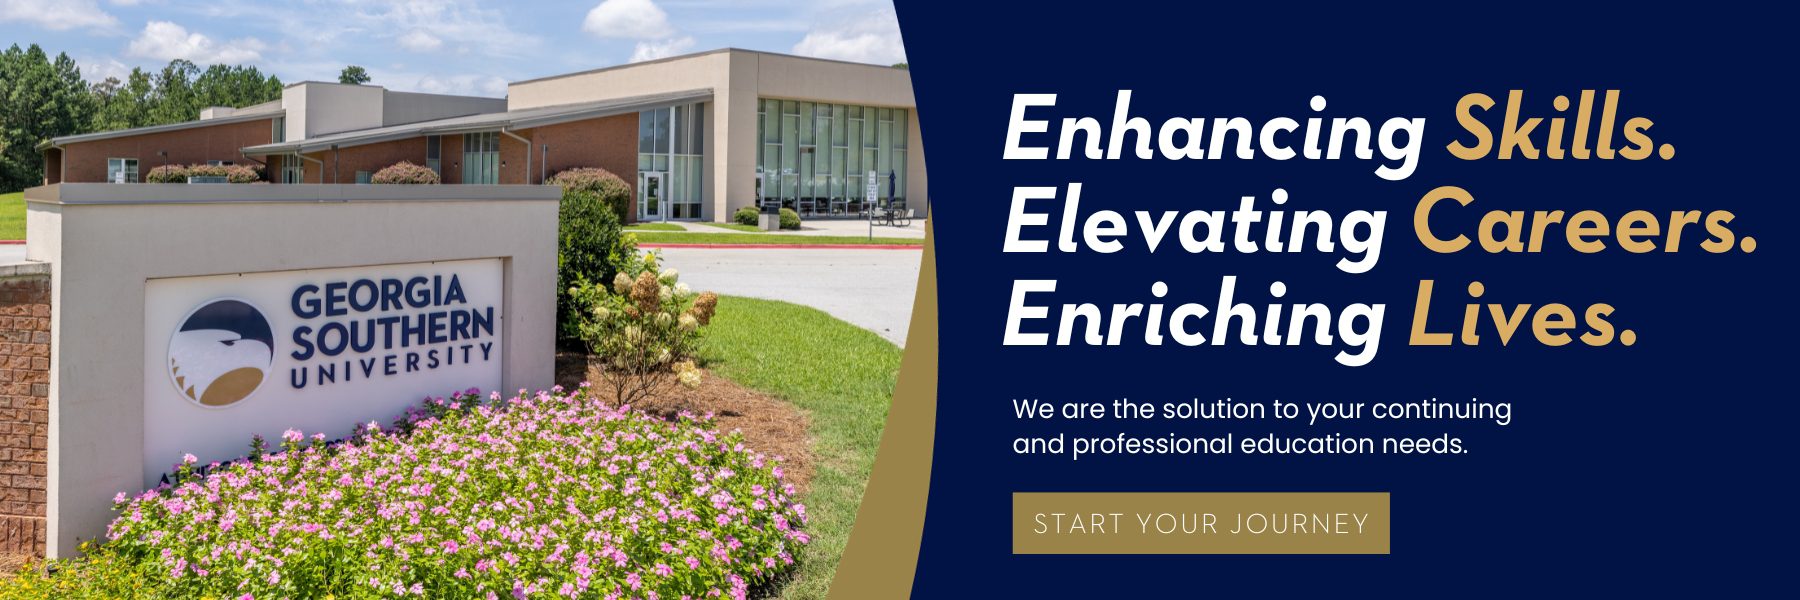 Enhancing Skills.
Elevating Careers.
Enriching Lives.

We are the solution to your continuing and professional education needs.

Start Your Journey